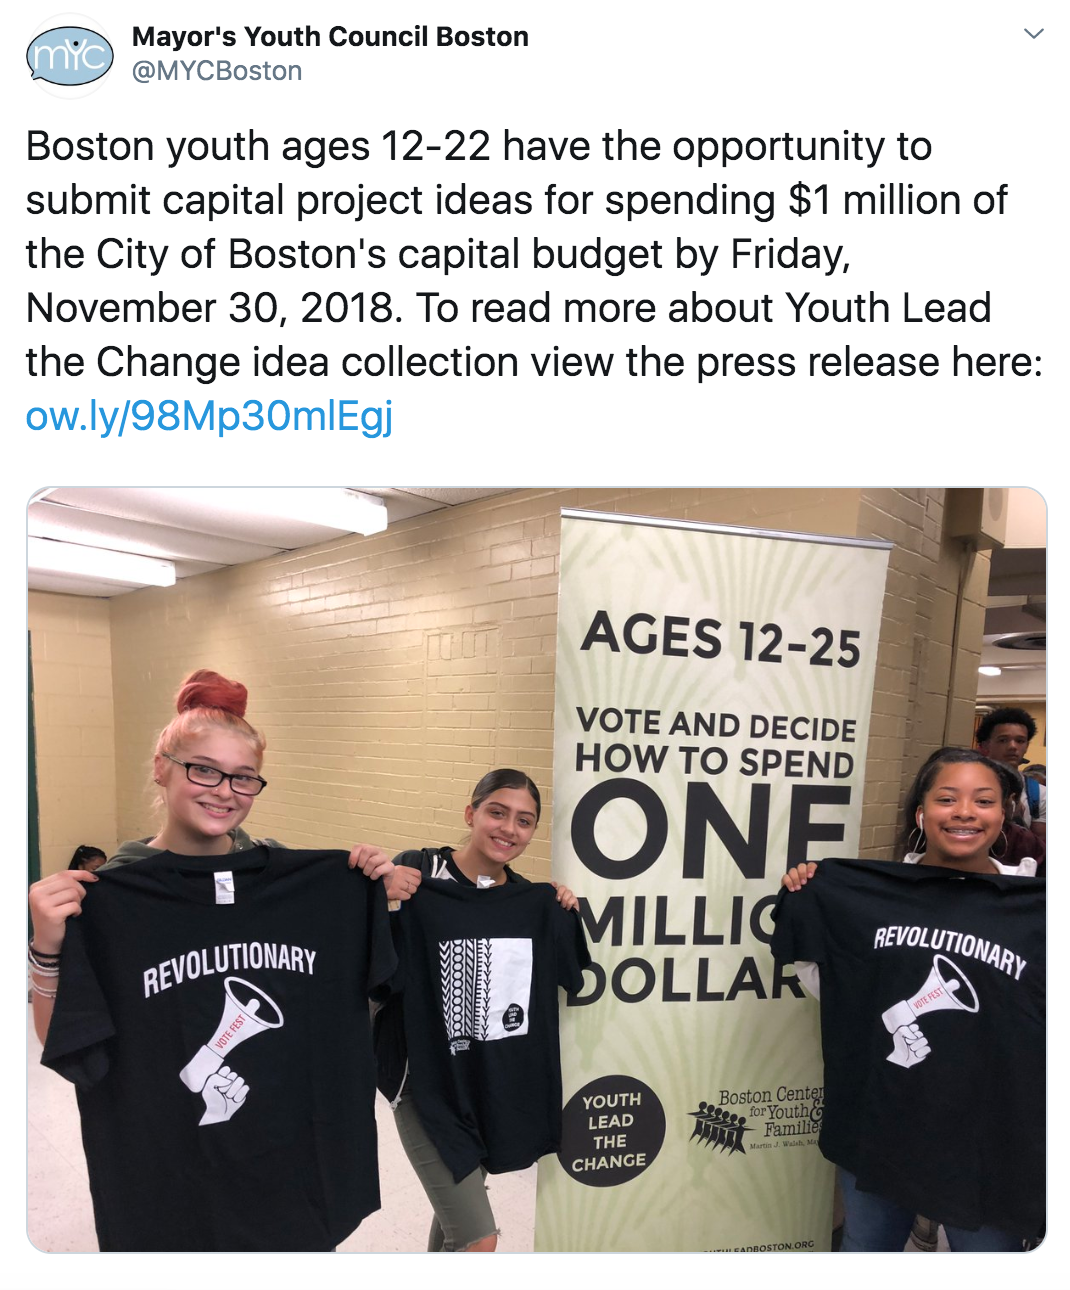 @MYCBoston Mayor's Youth Council Boston tweets opportunity for Boston youth to get involved in $1 million Youth Lead the Change participatory budgeting process.